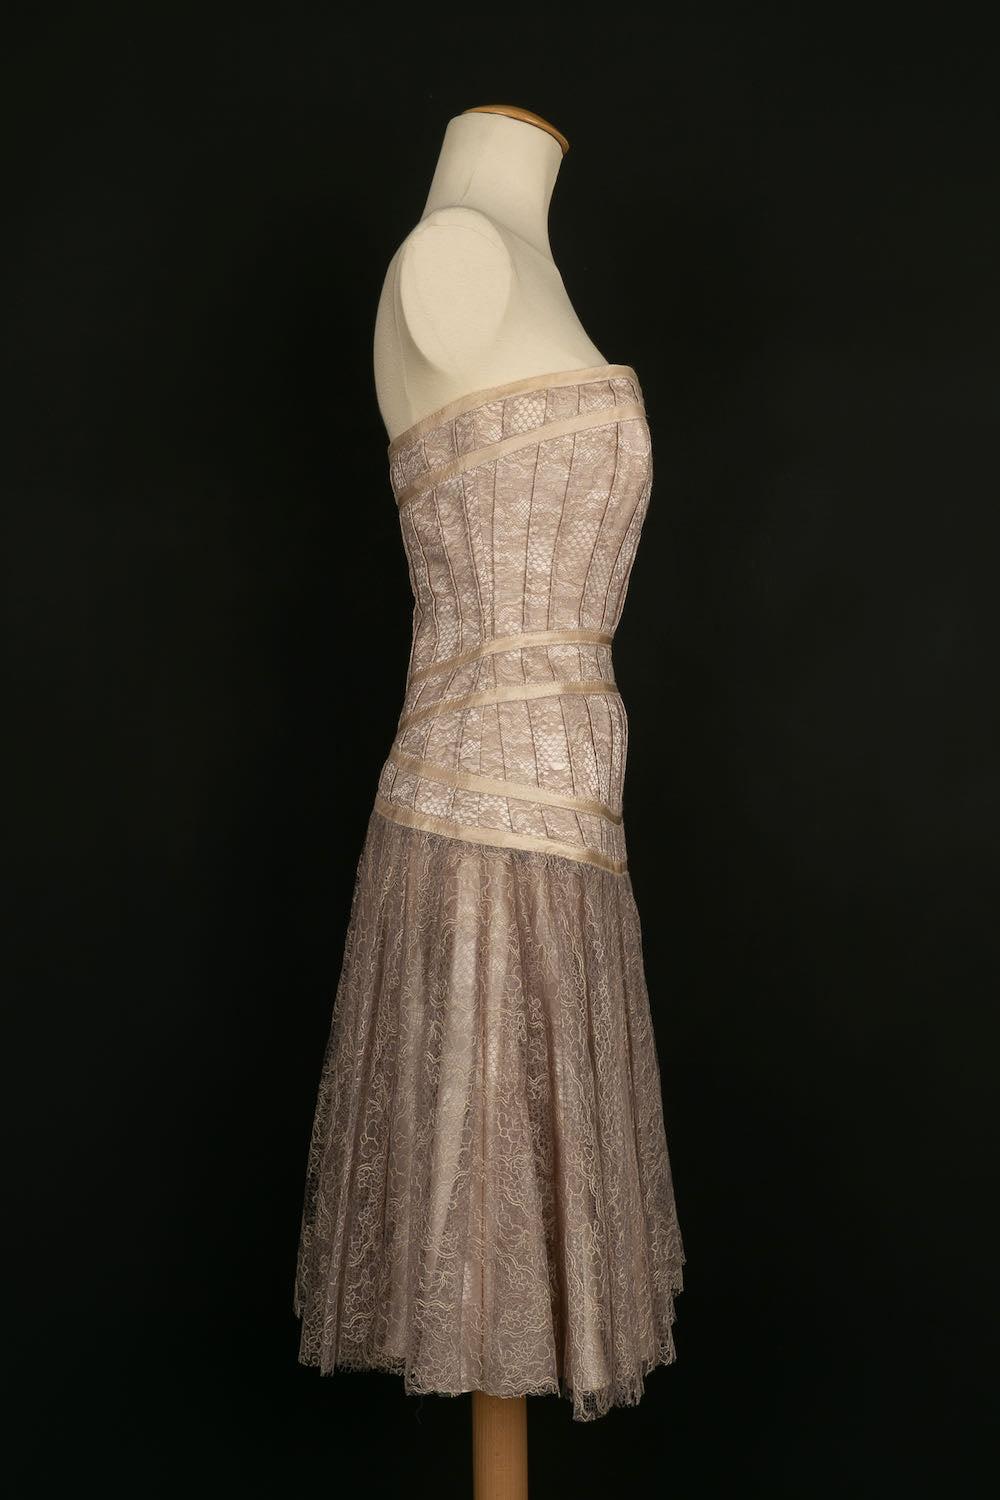 Christian Lacroix -(Made in France) Strapless lace and silk dress. Size 40FR.

Additional information: 
Dimensions: Chest: 46 cm, Waist: 36 cm, Hips: 45 cm, Length: 83 cm
Condition: Very good condition
Seller Ref number: VR103